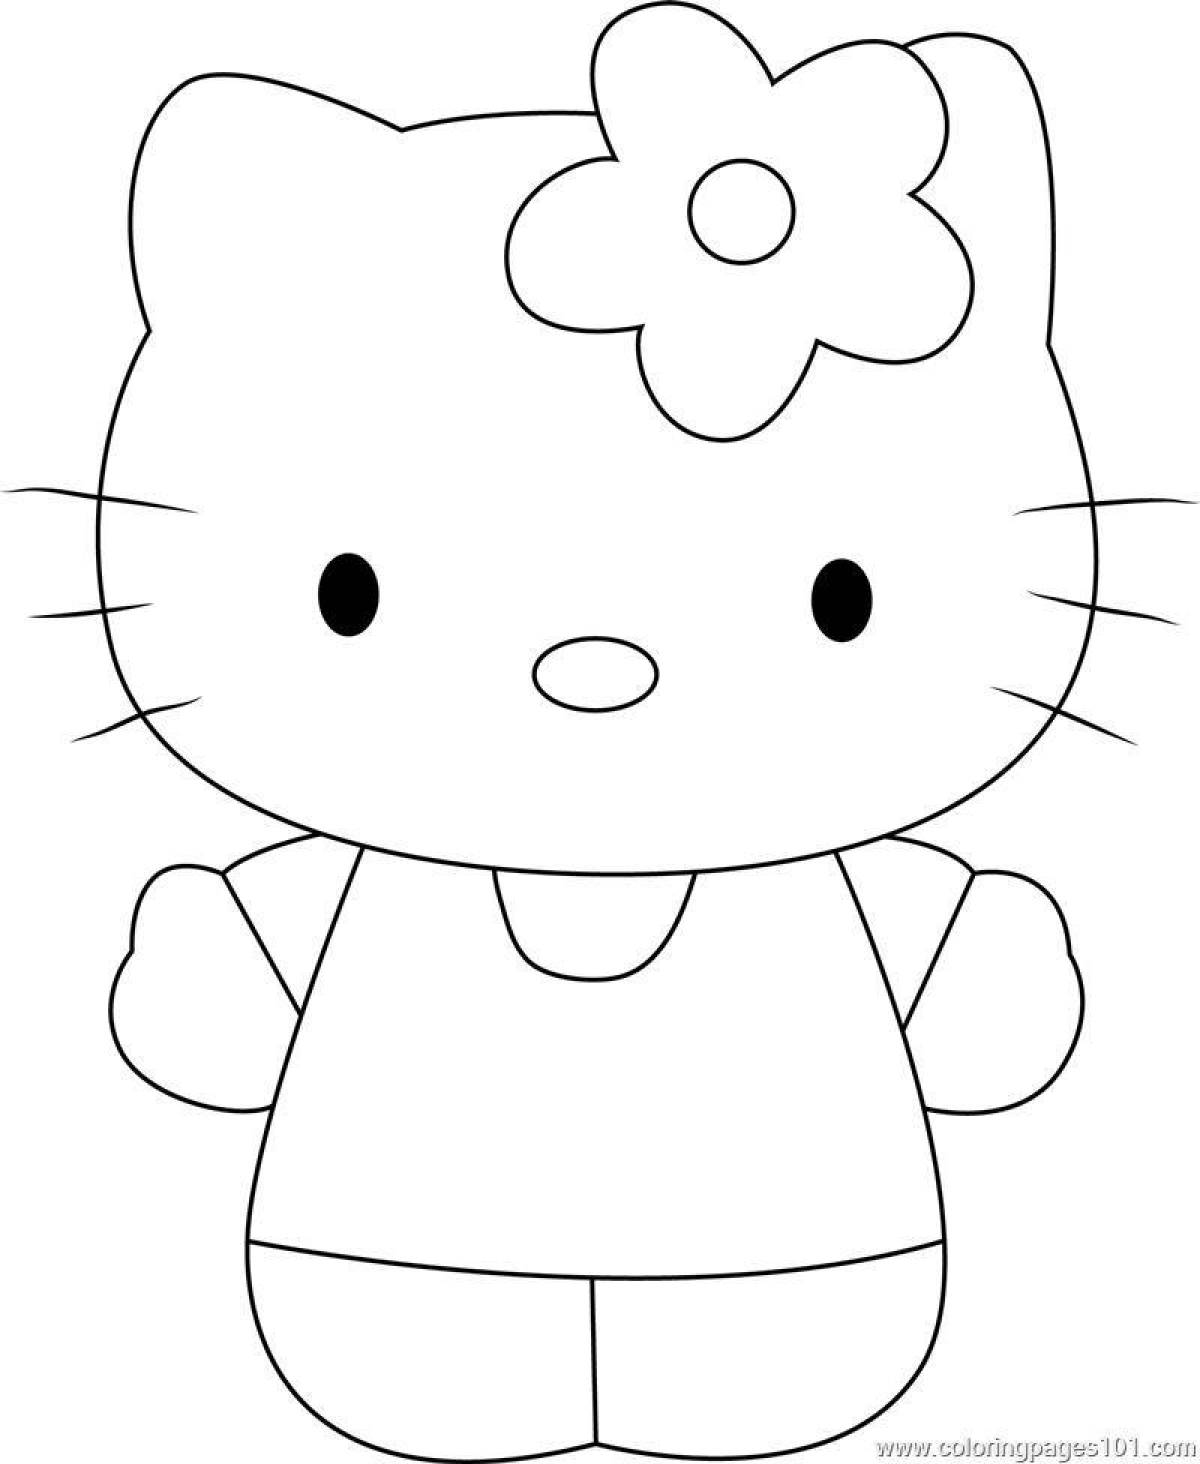 Incredible hello kitty coloring book with clothes